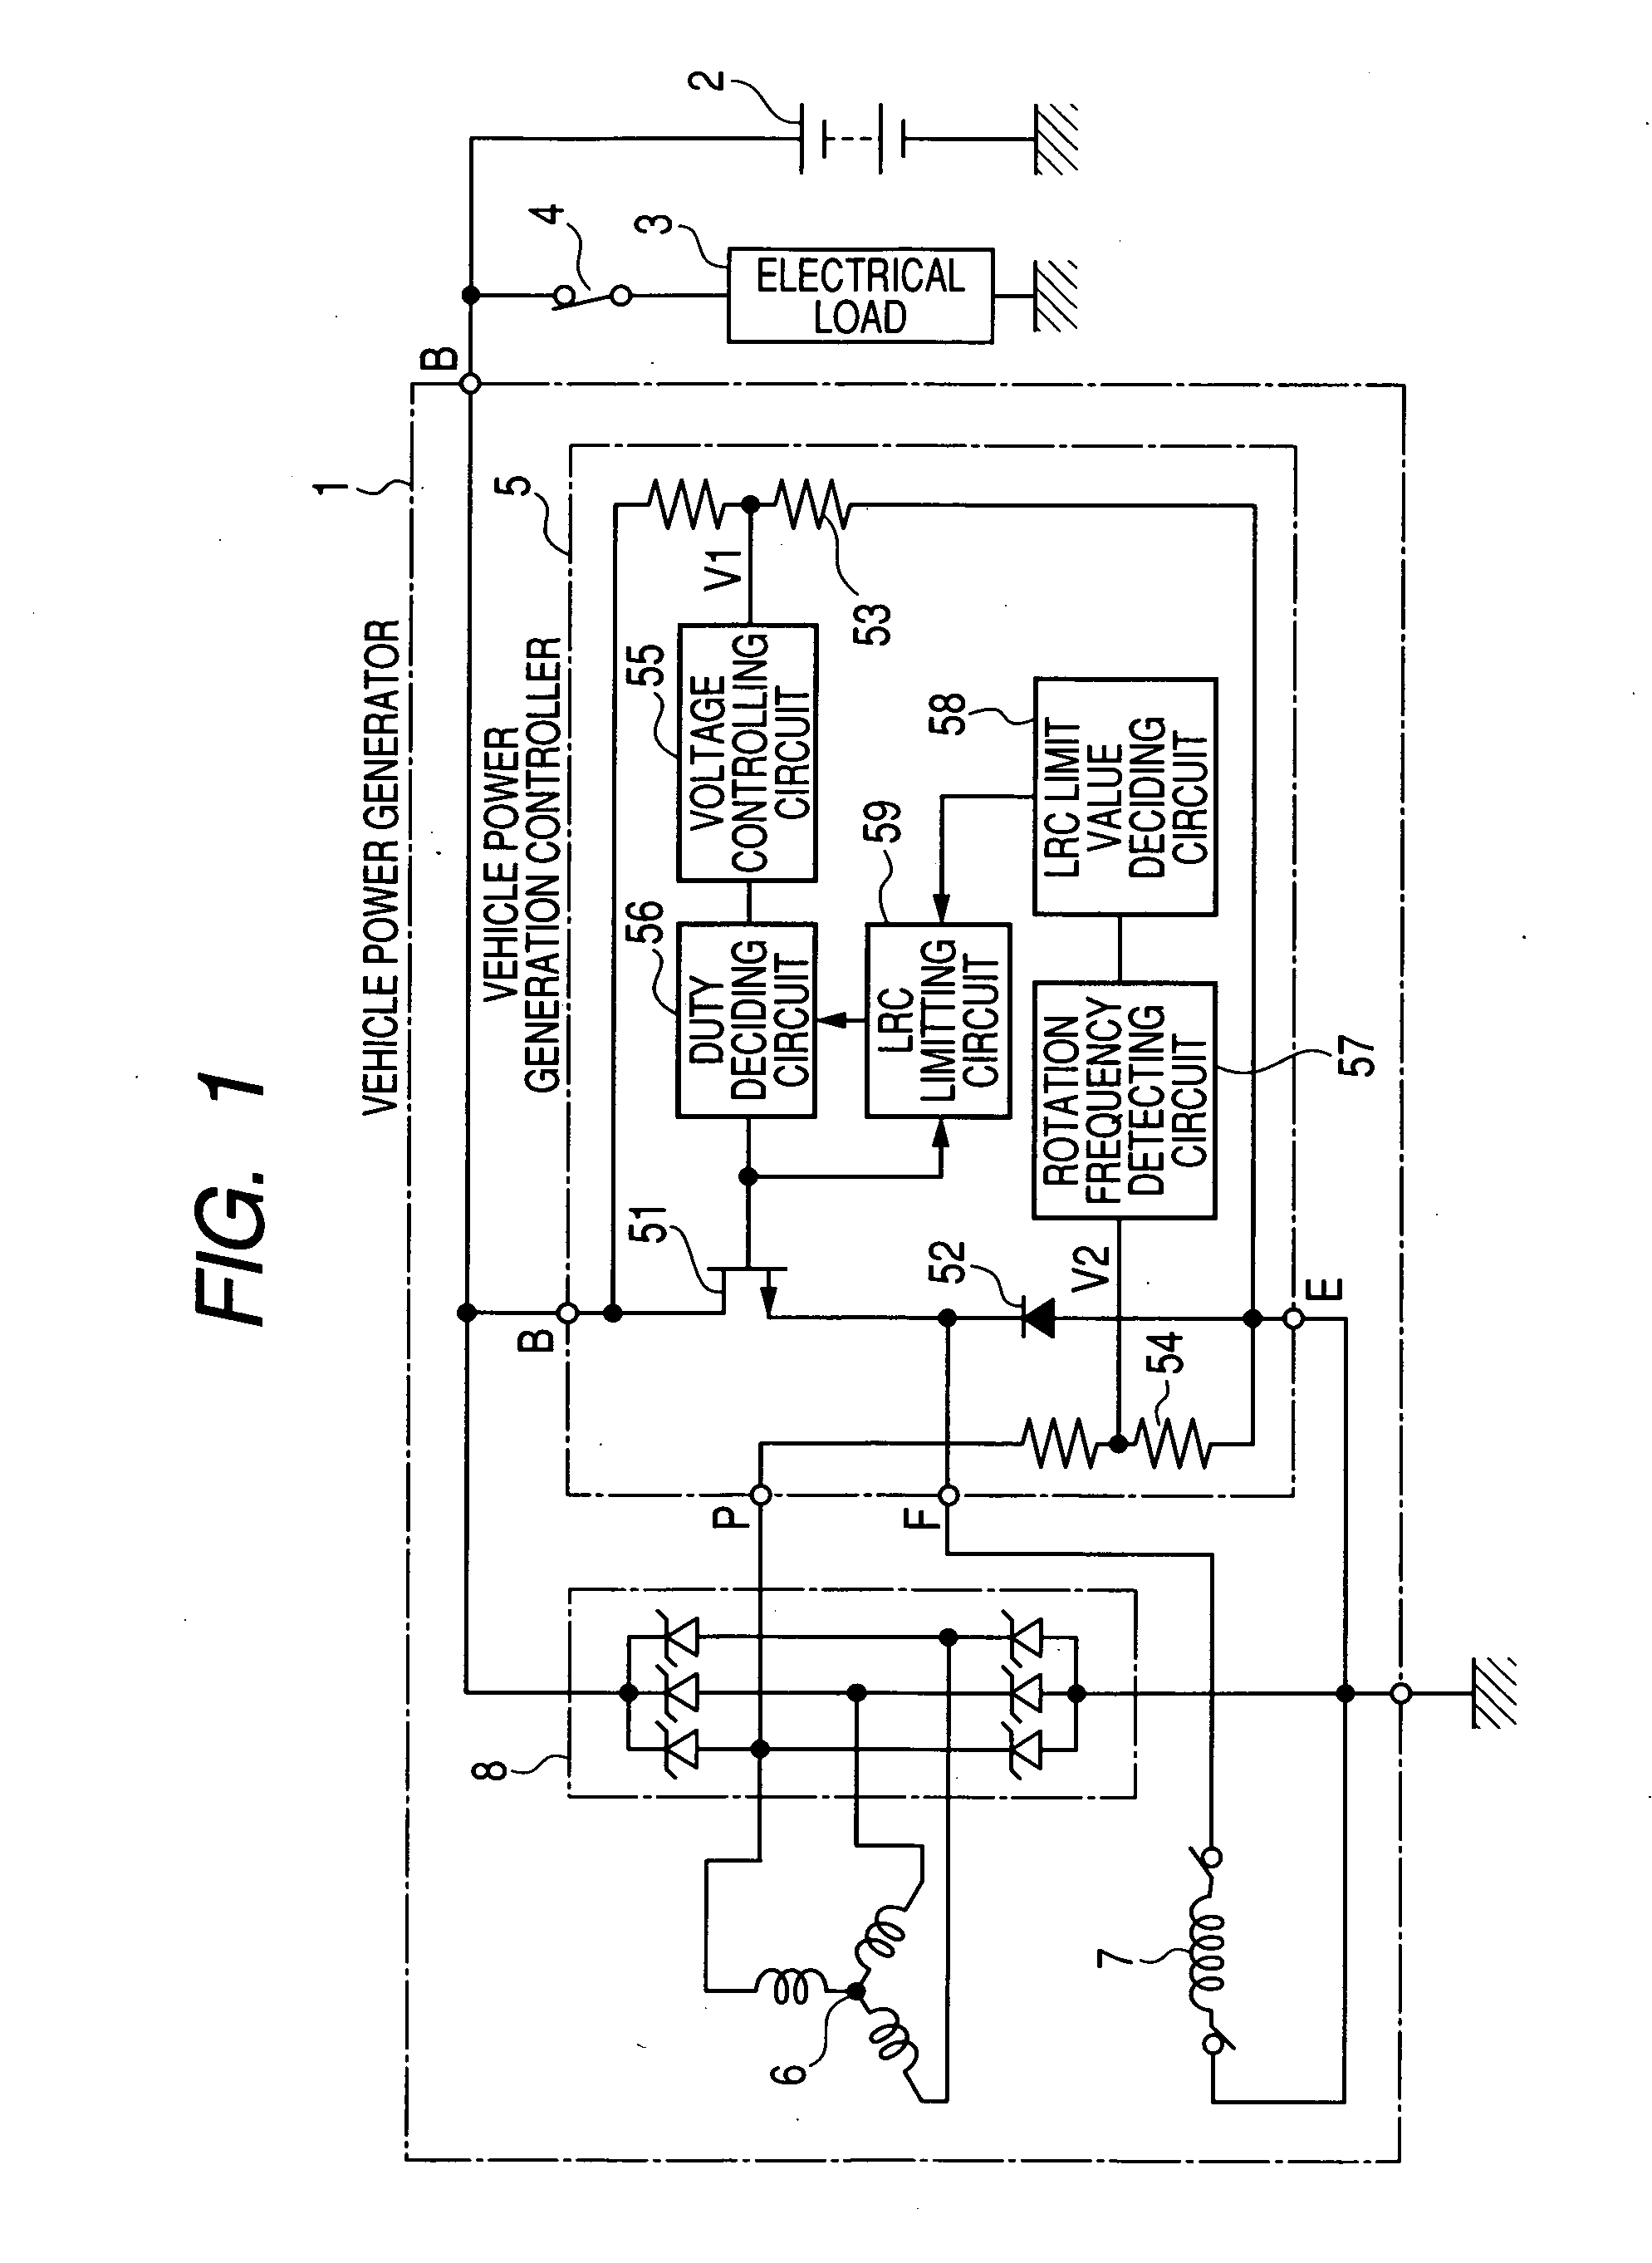 Apparatus for controlling power generation for vehicle